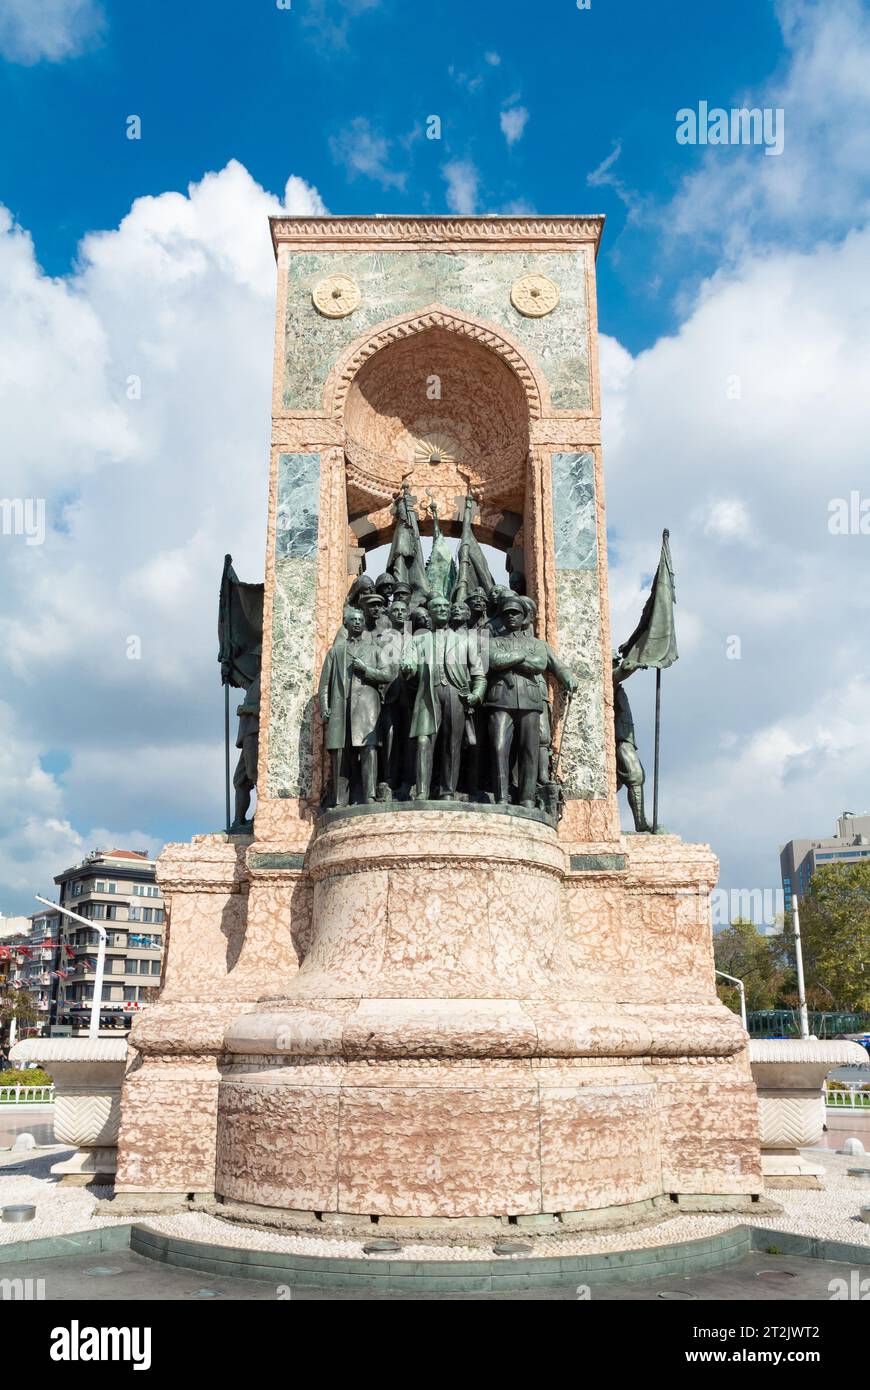 Istanbul, Turkey, The Republic Monument (Turkish: Cumhuriyet Anıtı) is a monument to commemorate the formation of the Turkiish Republic in 1923. Stock Photo